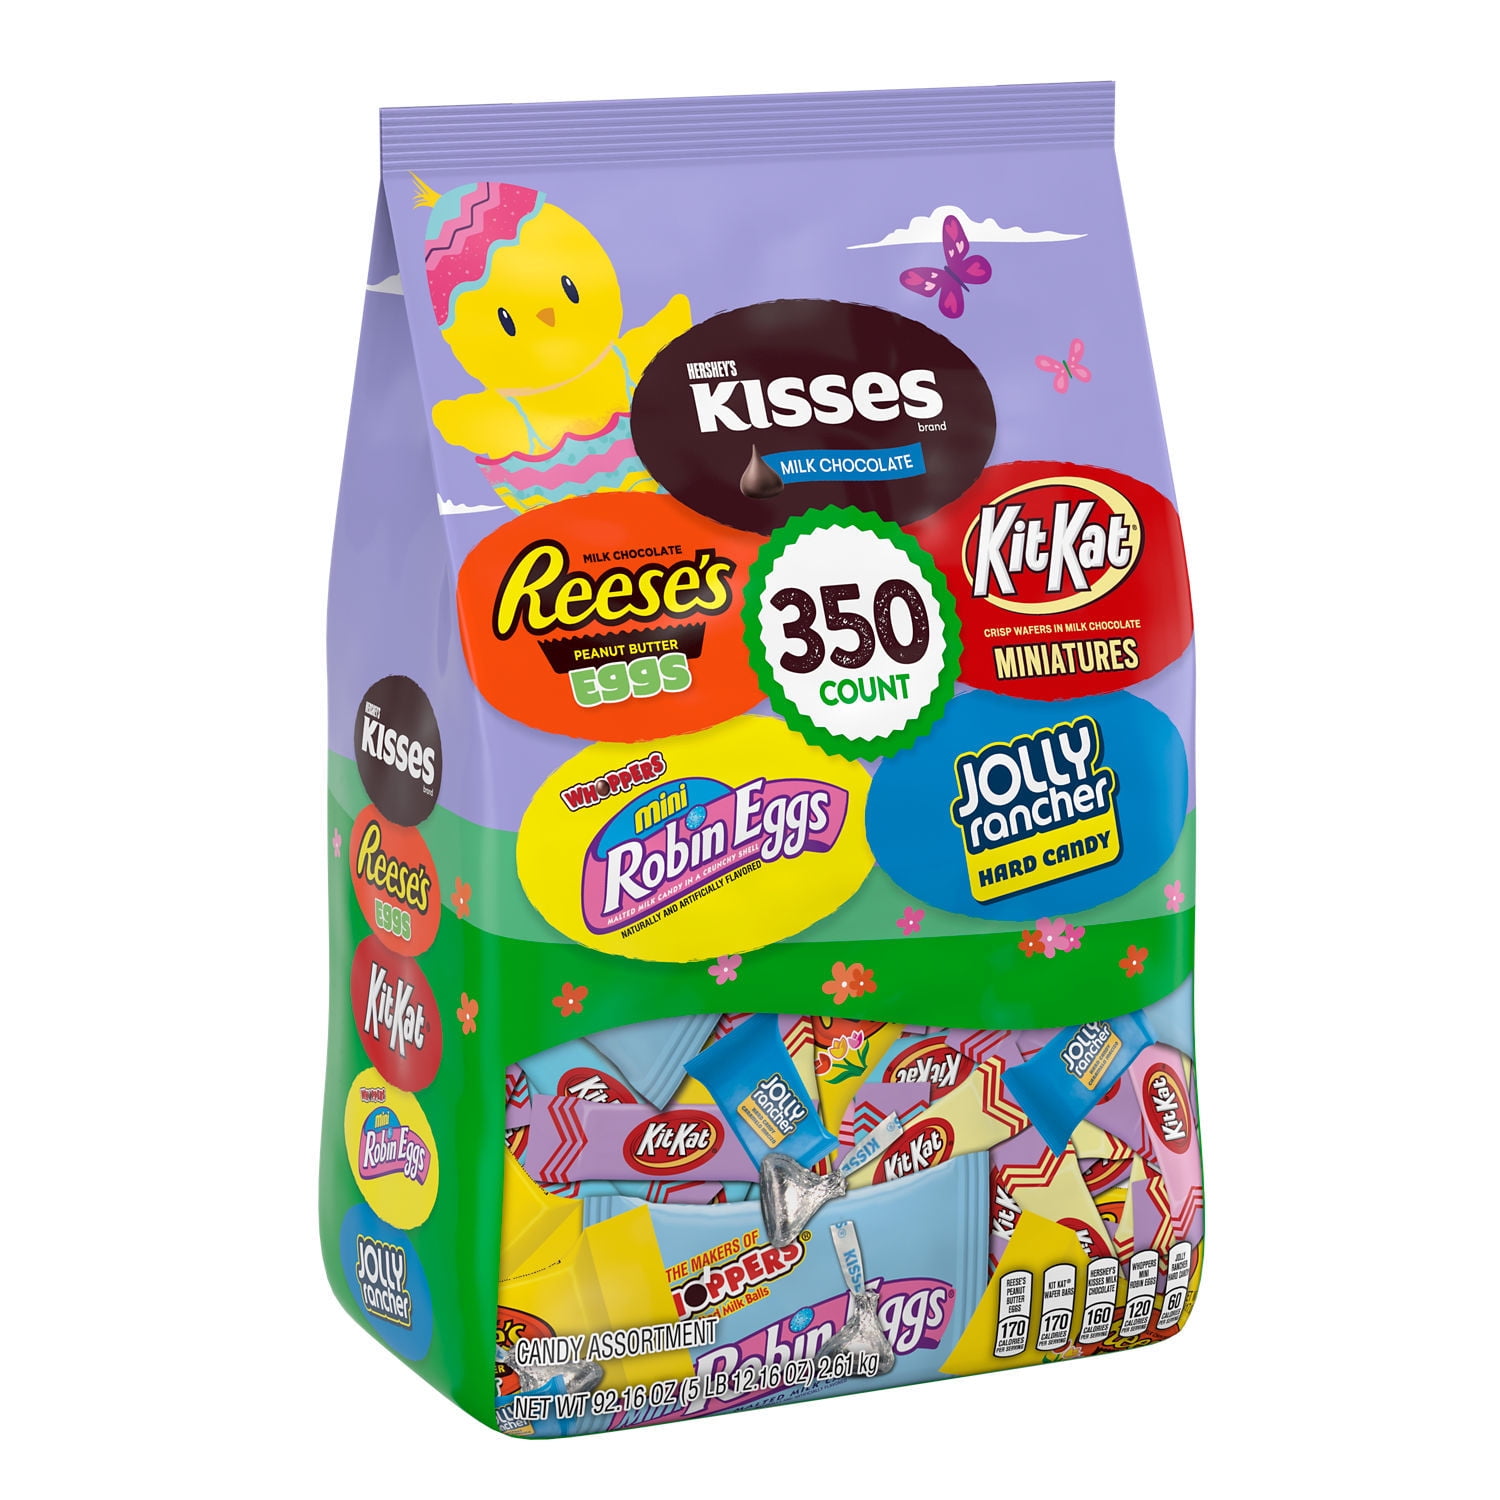 Hershey, Chocolate and Fruit Flavored Assortment Treats, Easter Candy, 92.16 oz, Bulk Variety Bag (350 Pieces)